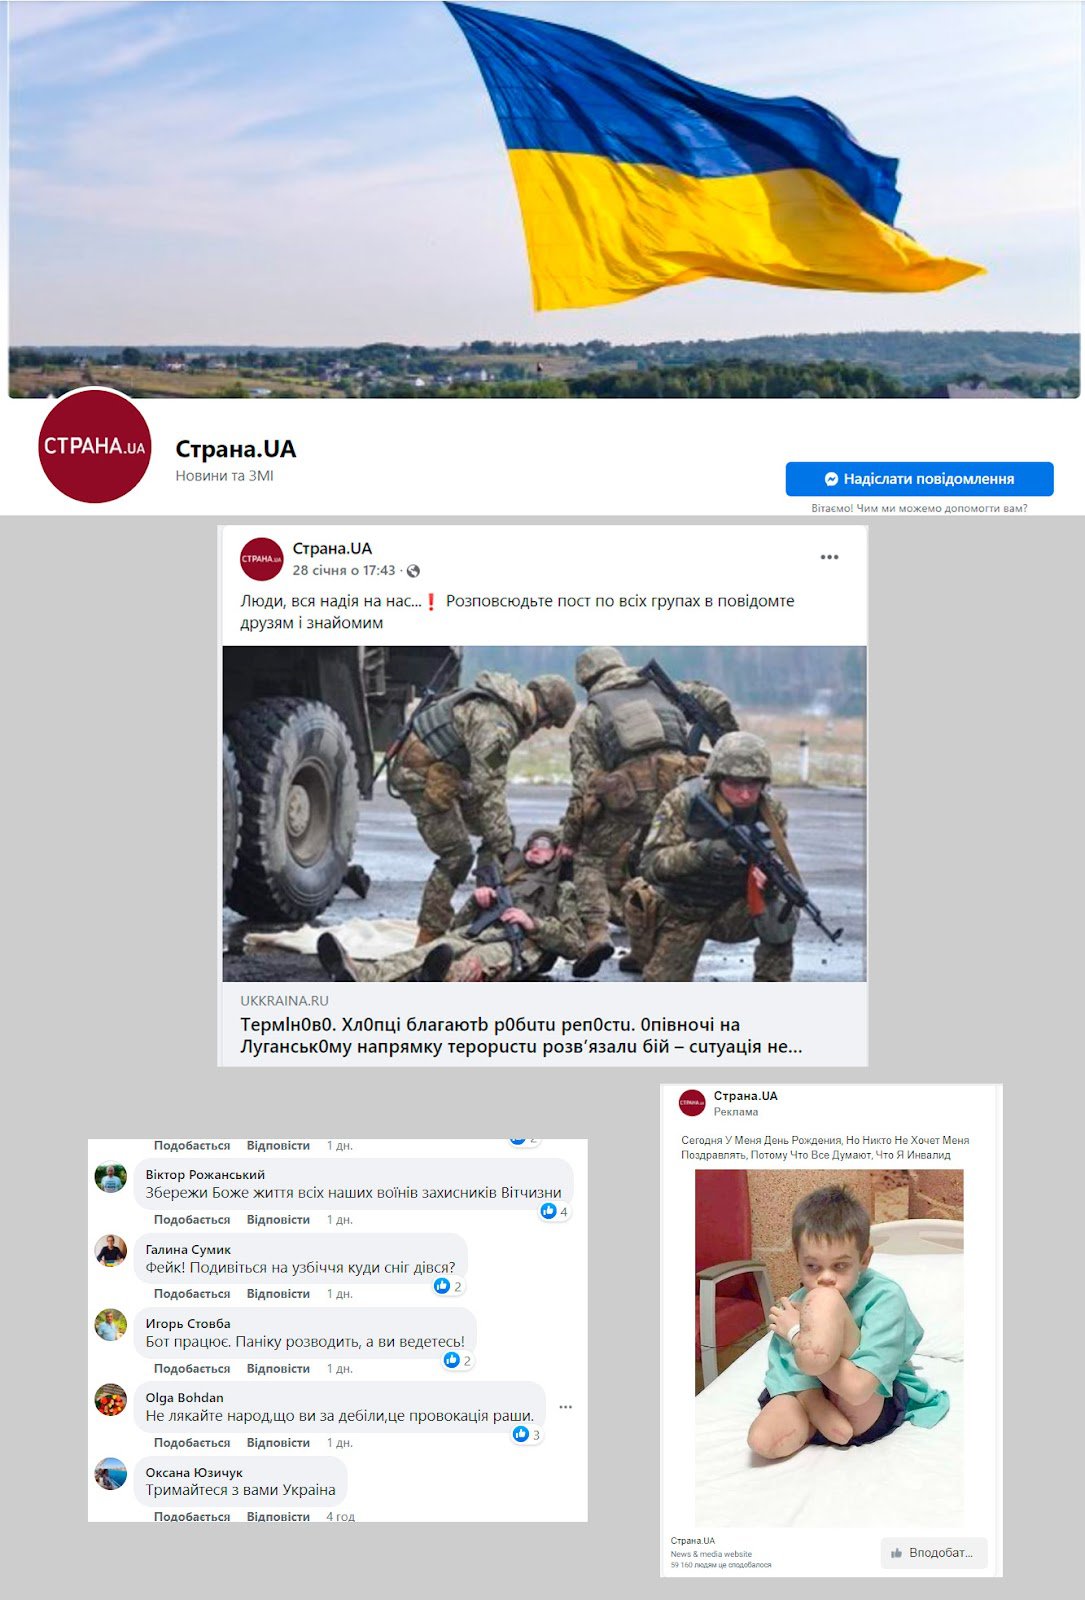 Facebook page Strana.UA using the logo and title of a pro-Russian website but pretending to be a Ukrainian patriotic page and the example of the page’s FB ad with a disabled child asking to like the page. Screenshots: Texty.org.ua ~